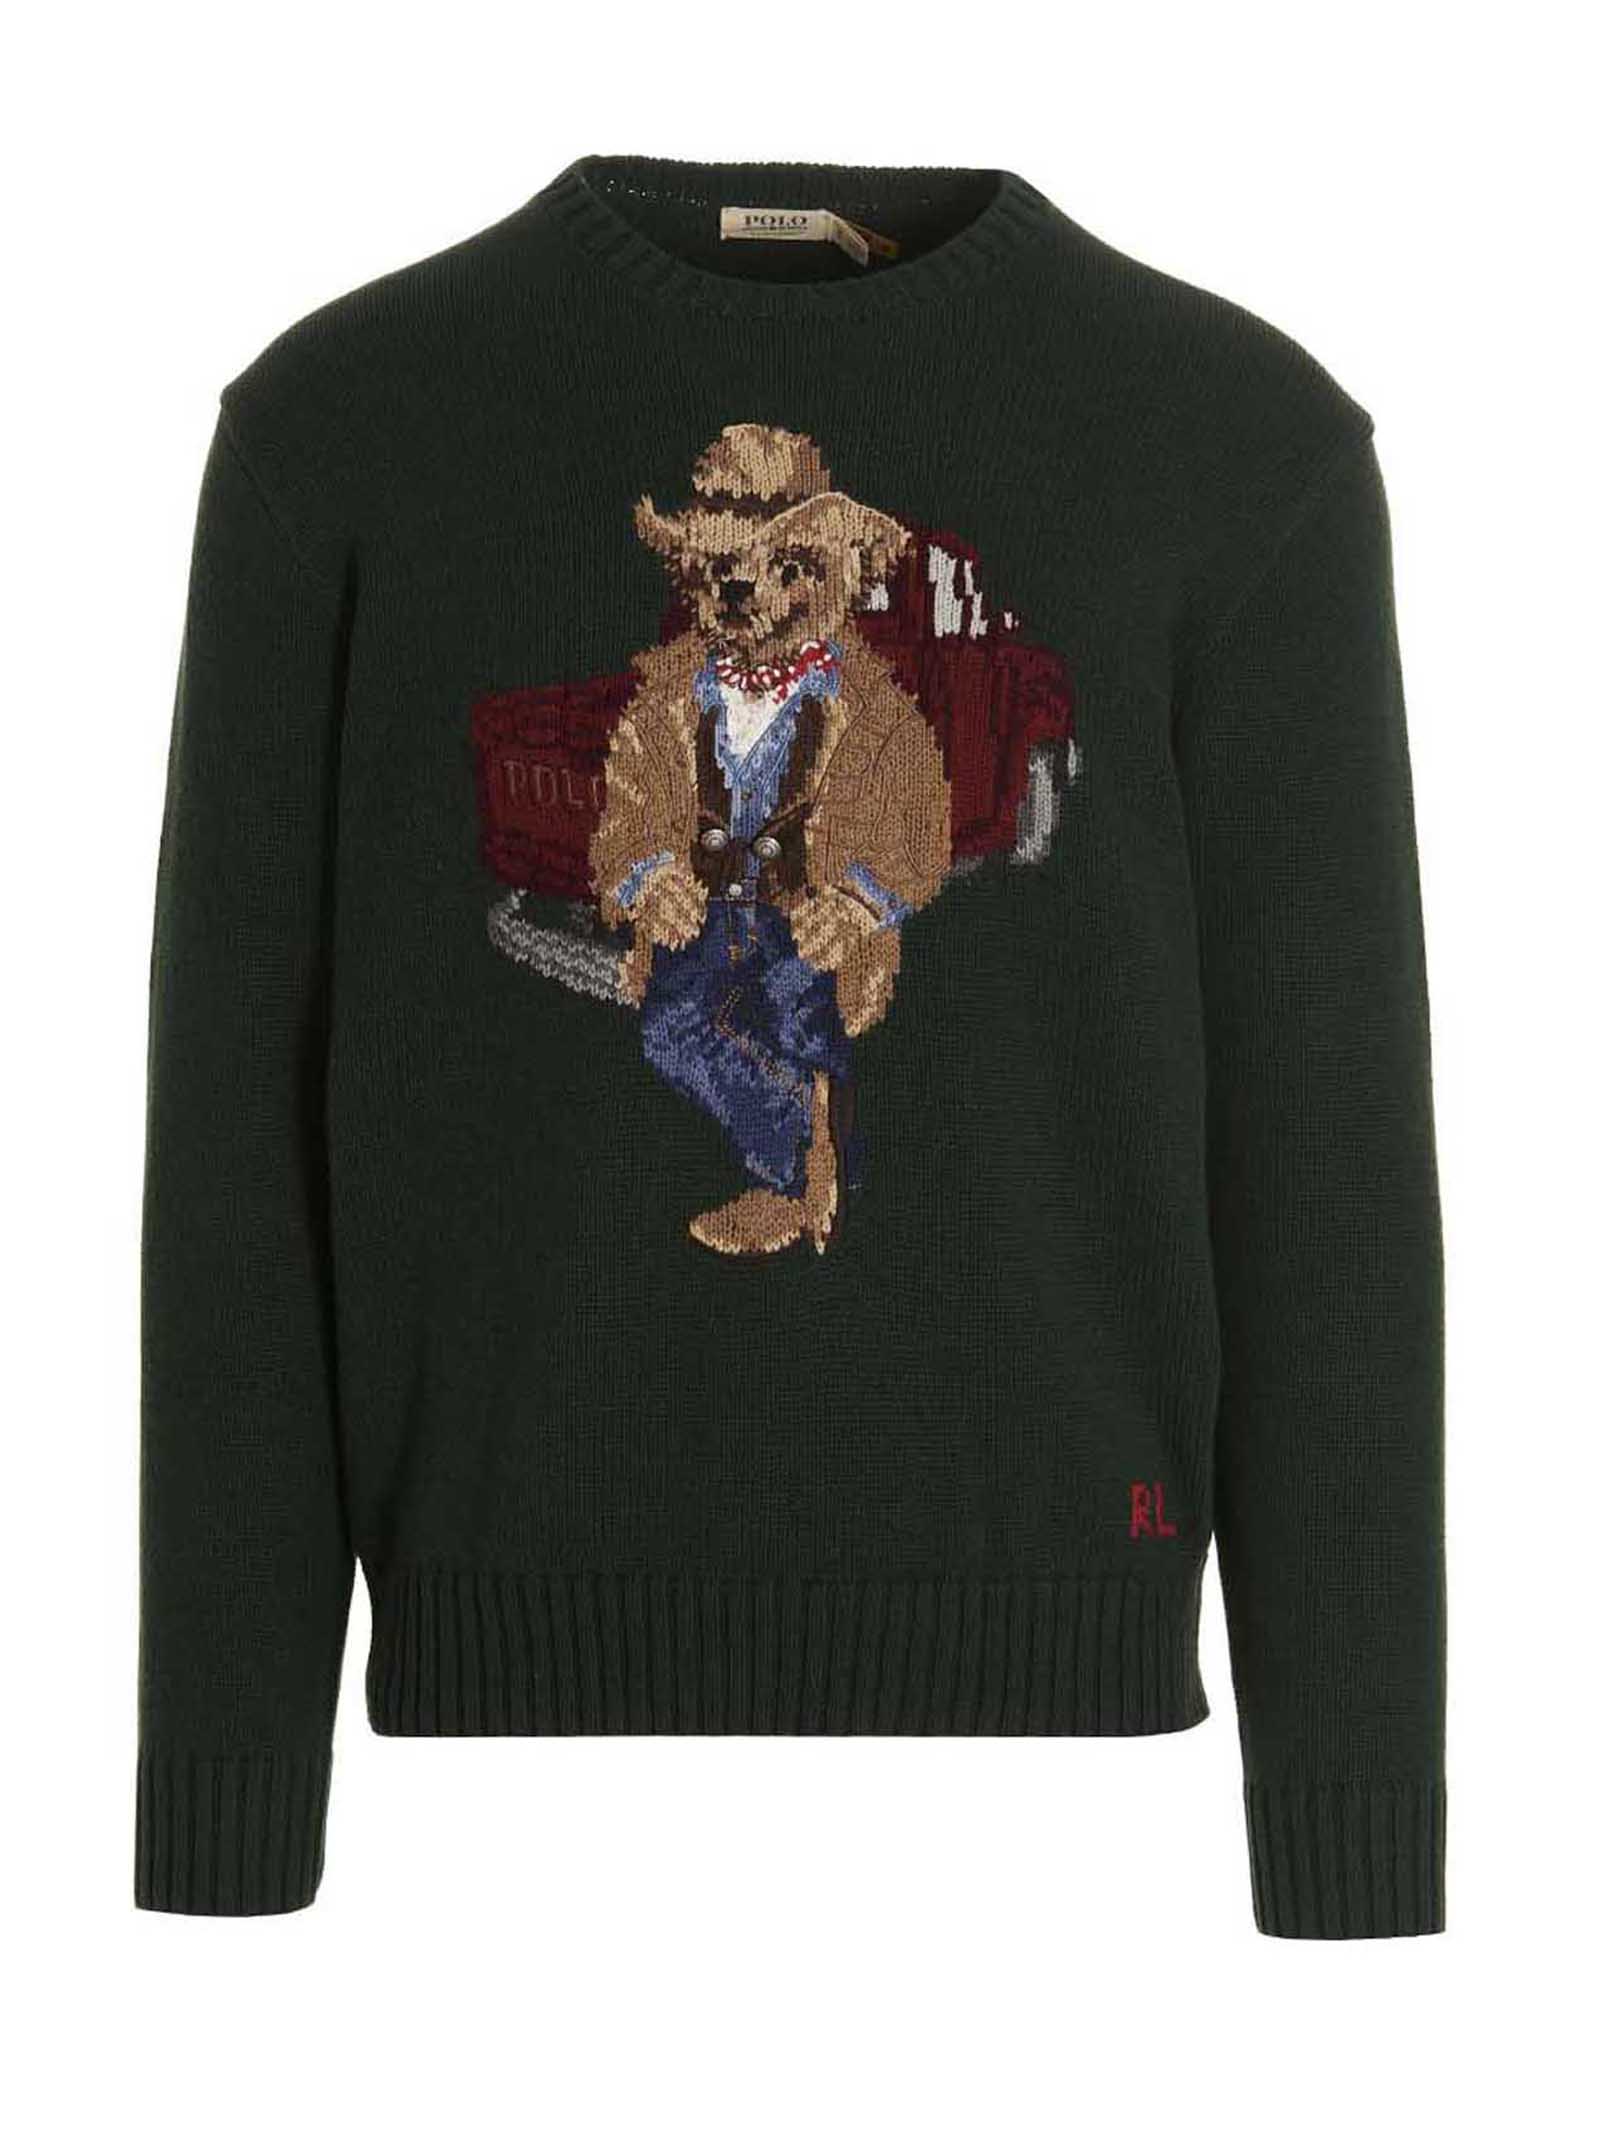 POLO RALPH LAUREN TEDDY EMBROIDERY SWEATER